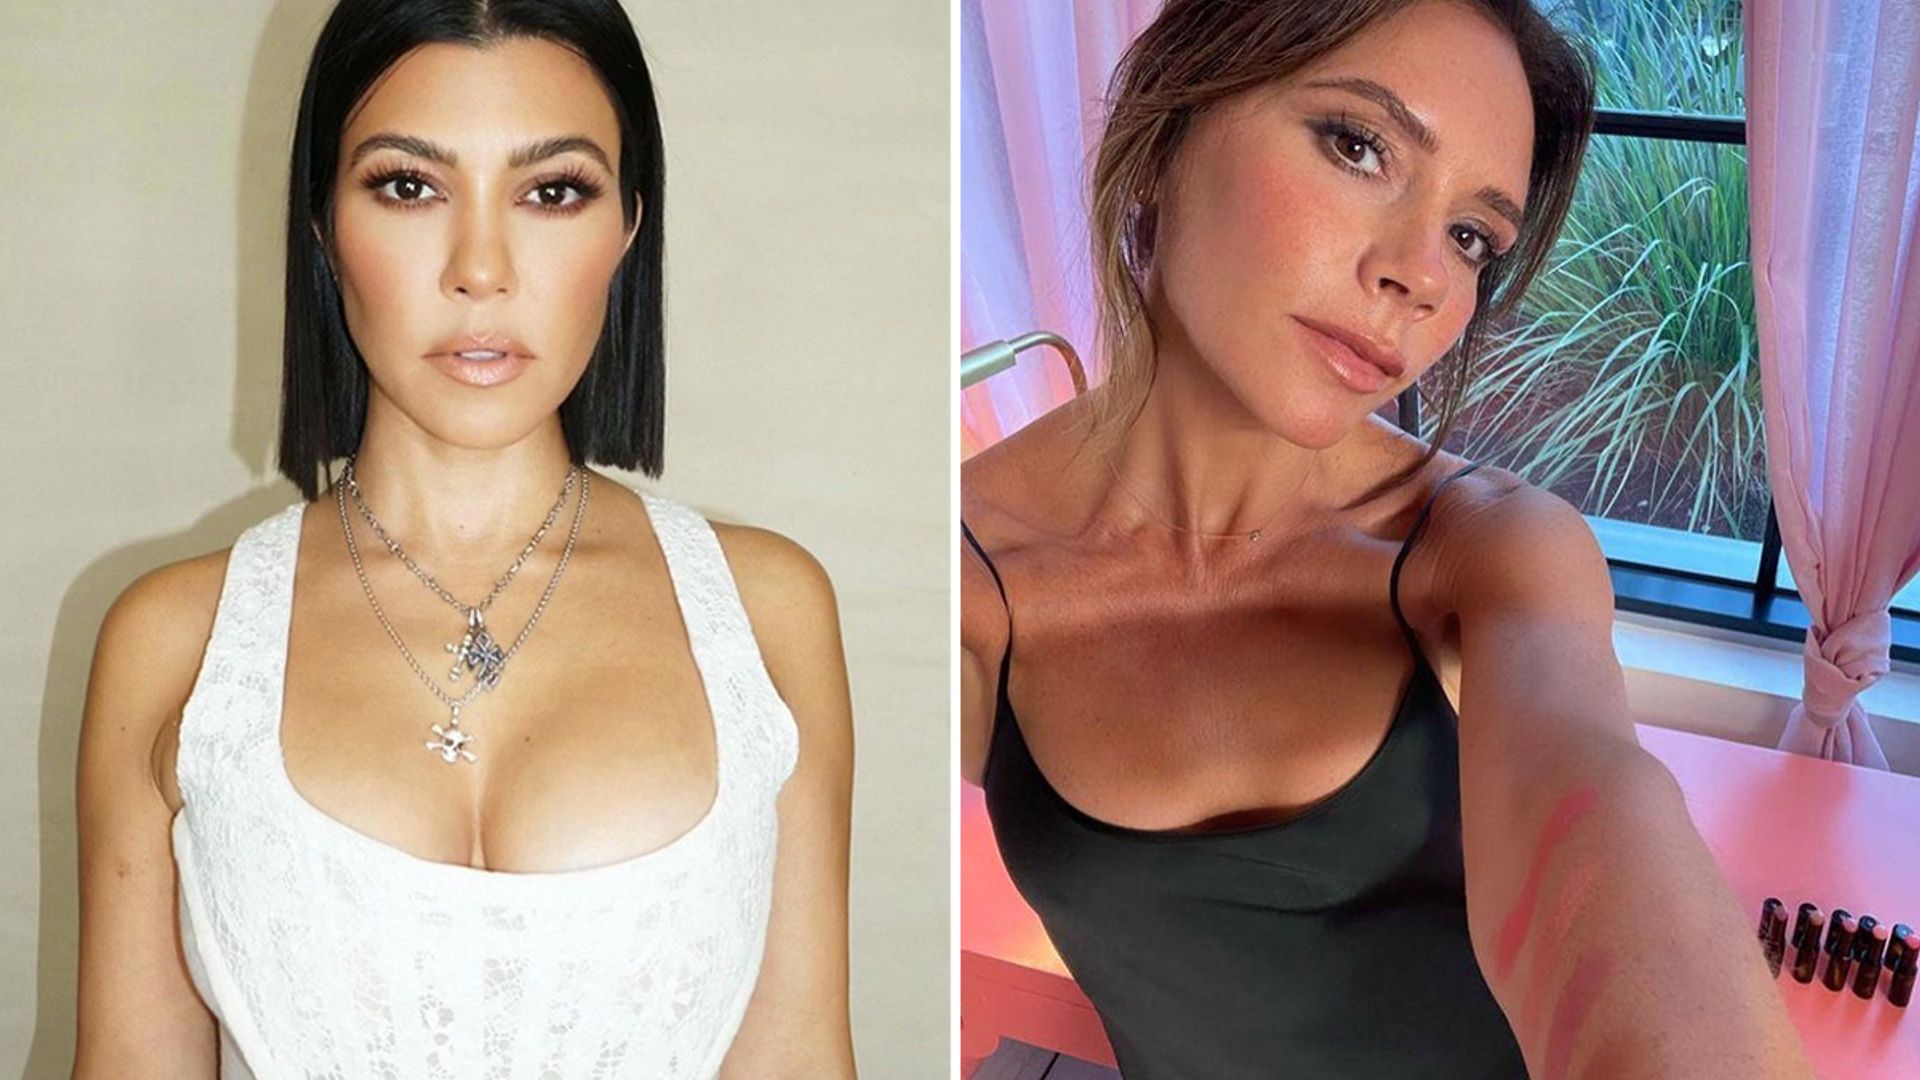 Kourtney Kardashian and Victoria Beckham swear by collagen supplements - and this one has 30% off